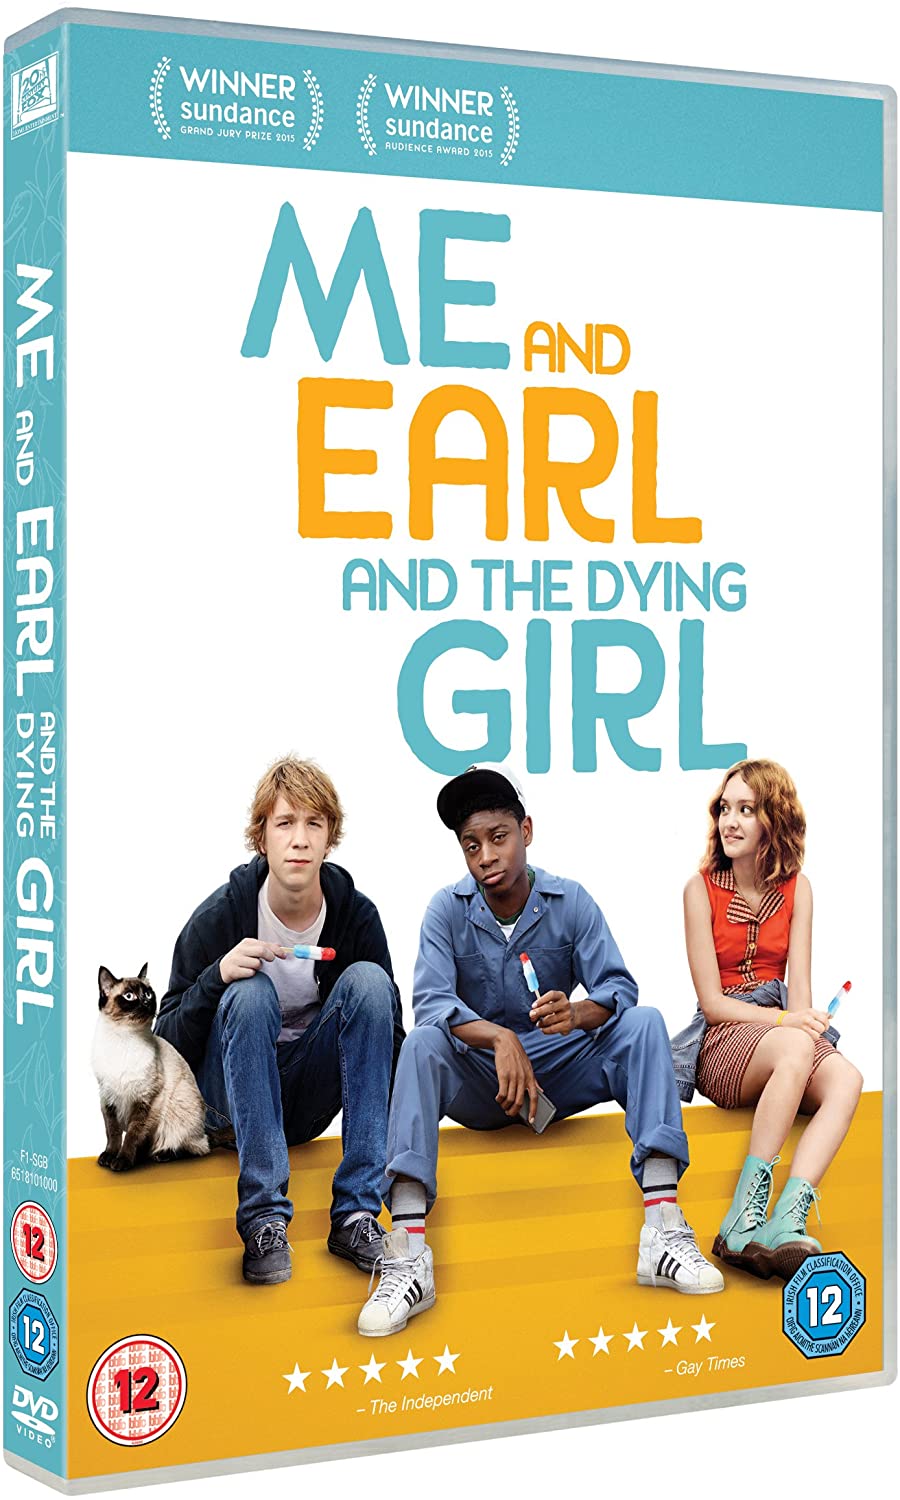 Me And Earl And The Dying Girl [2017] - Drama/Comedy [DVD]